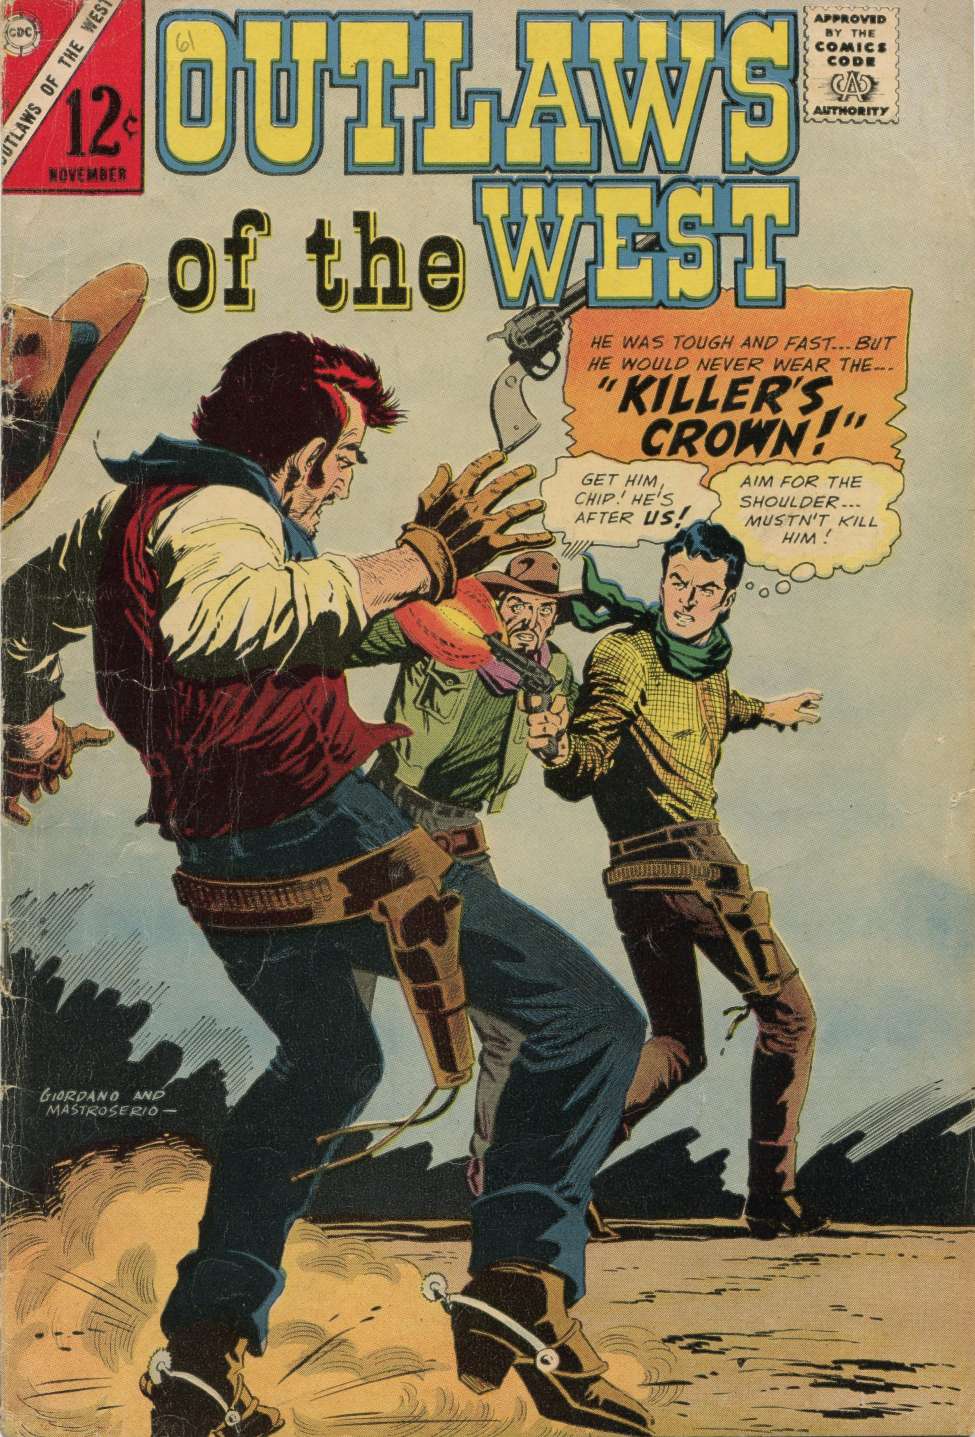 Book Cover For Outlaws of the West 61